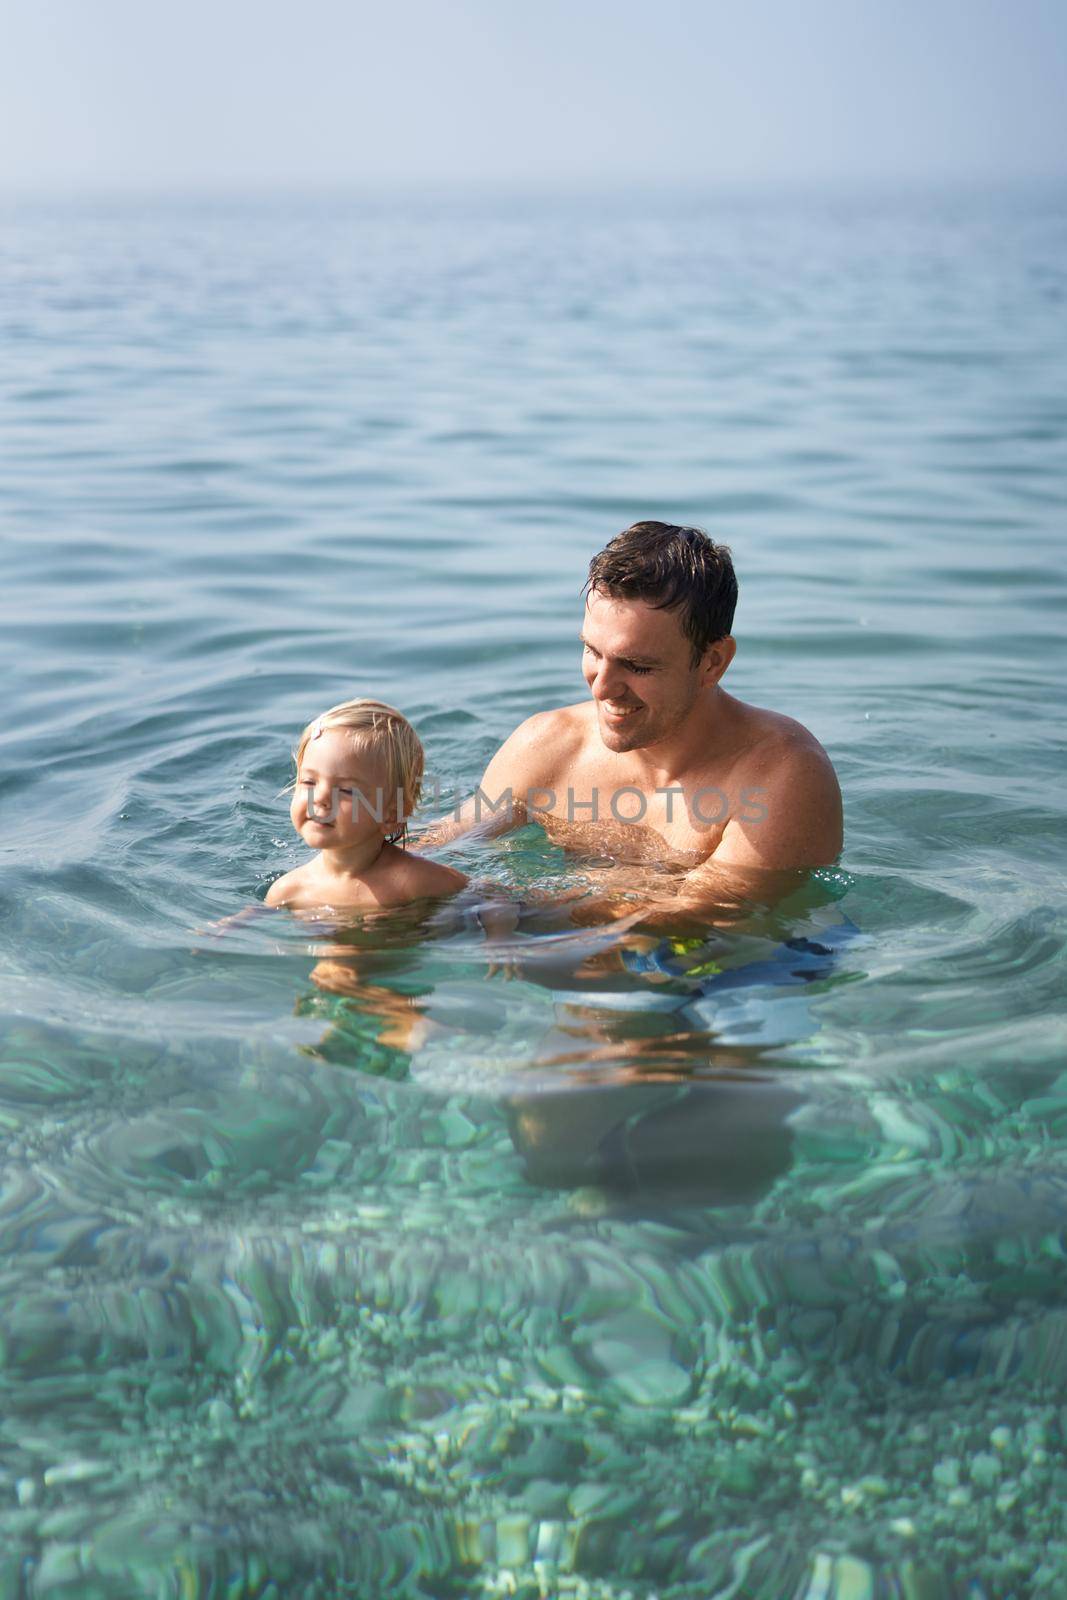 Smiling dad teaching little girl to swim by Nadtochiy